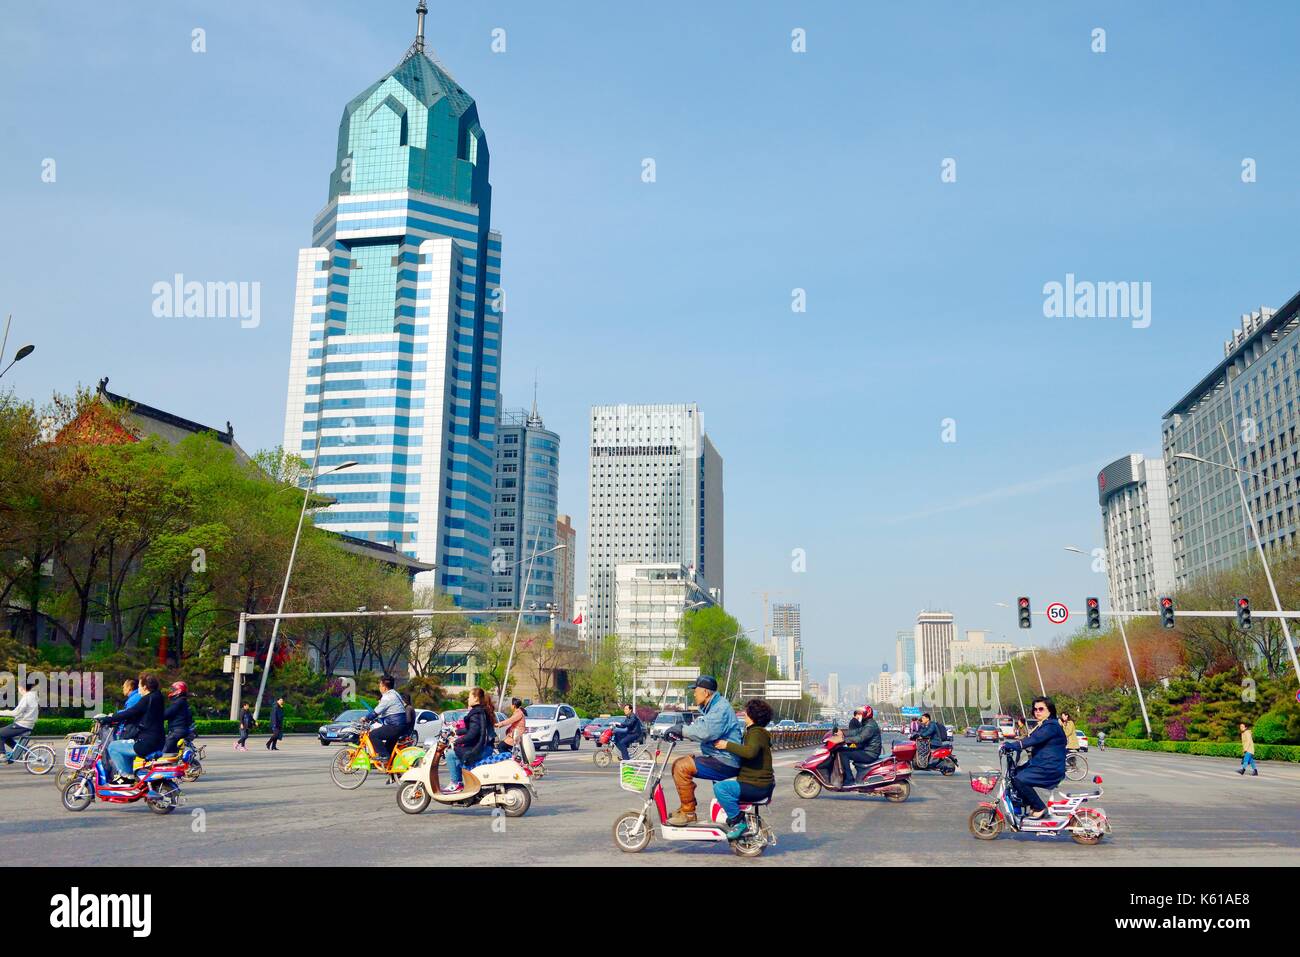 City of Taiyuan, Shanxi Province, China. West along Yingze Street seen from May 1st Square in the city centre Stock Photo